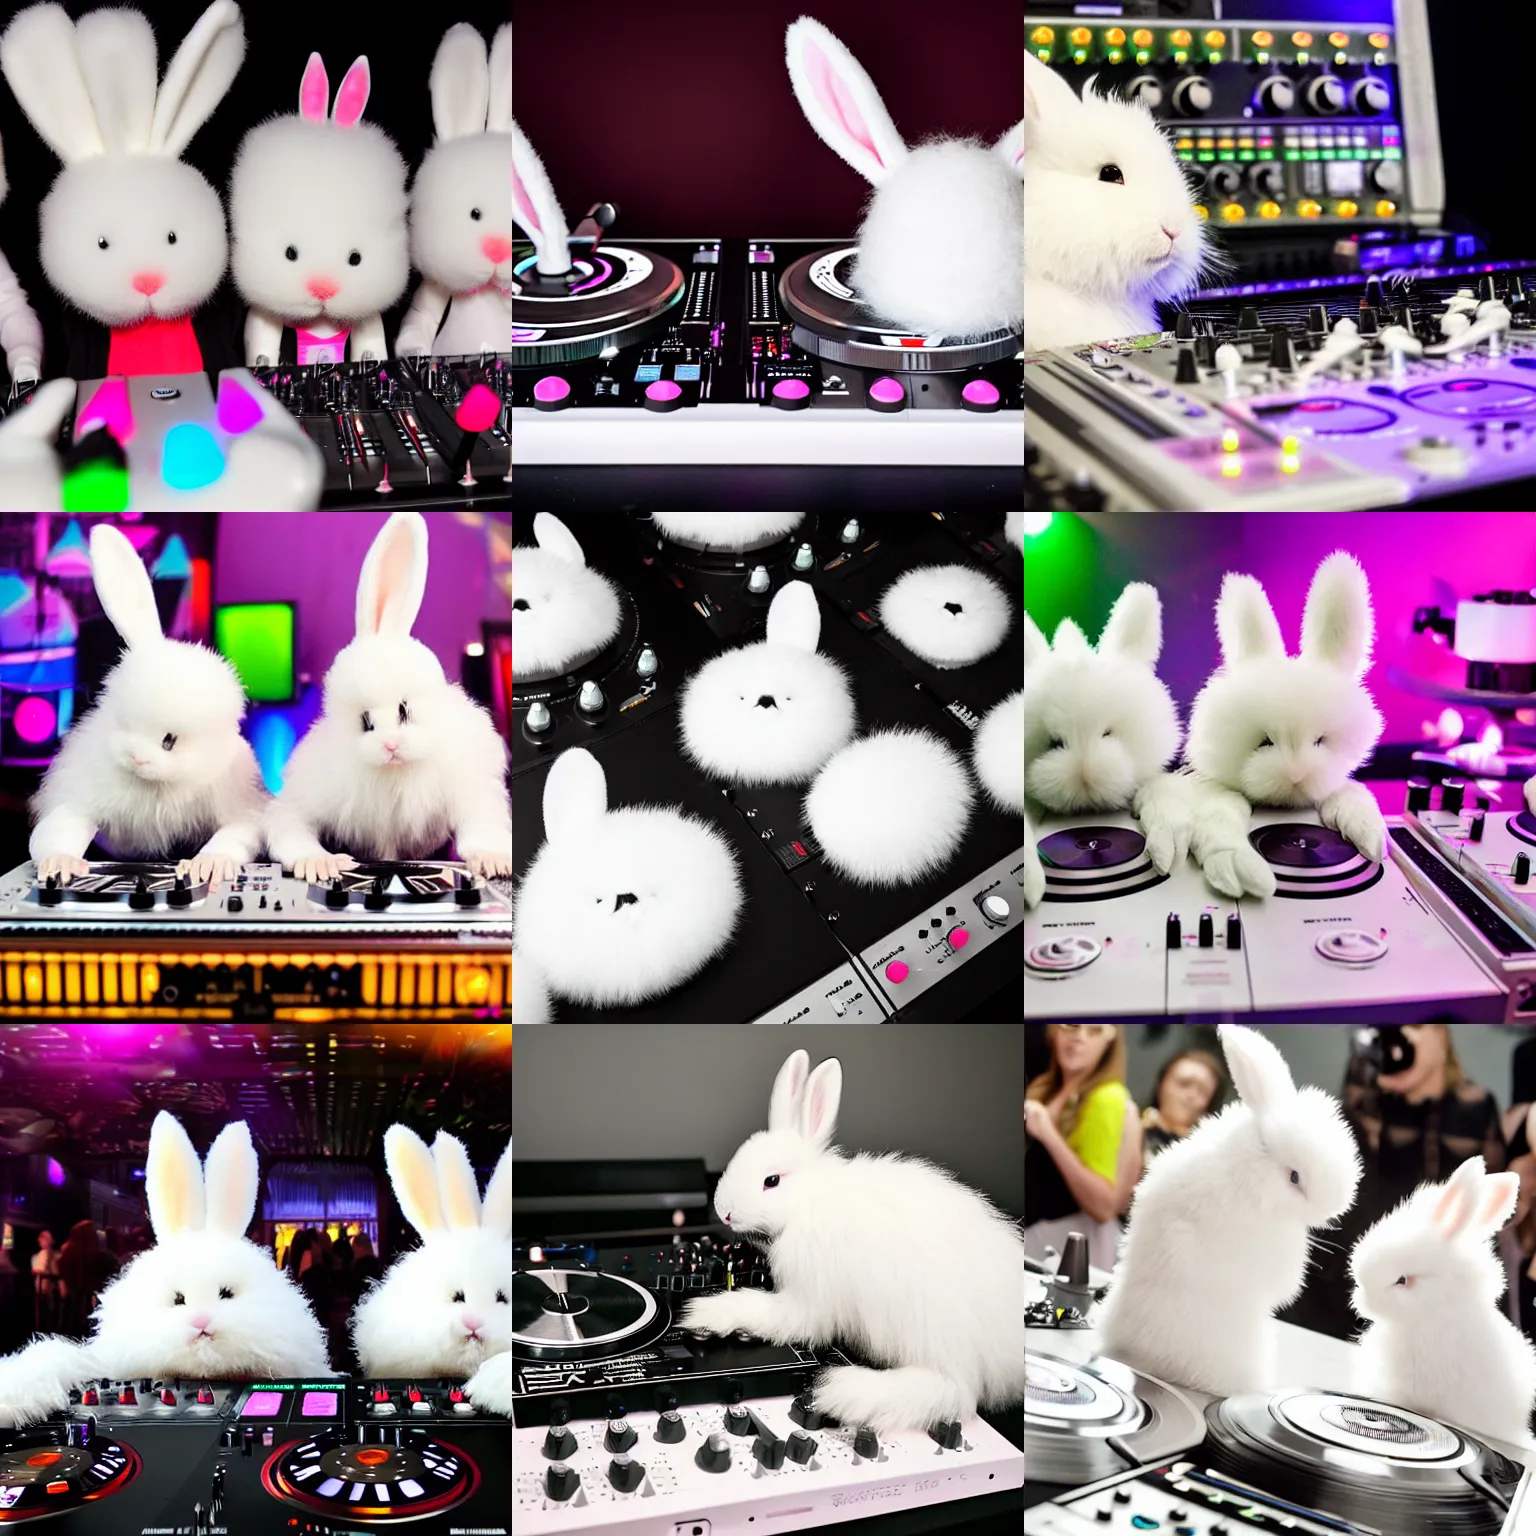 Prompt: a hundred super cute fluffy white bunny rabbits DJing with DJ turntables, photoreal